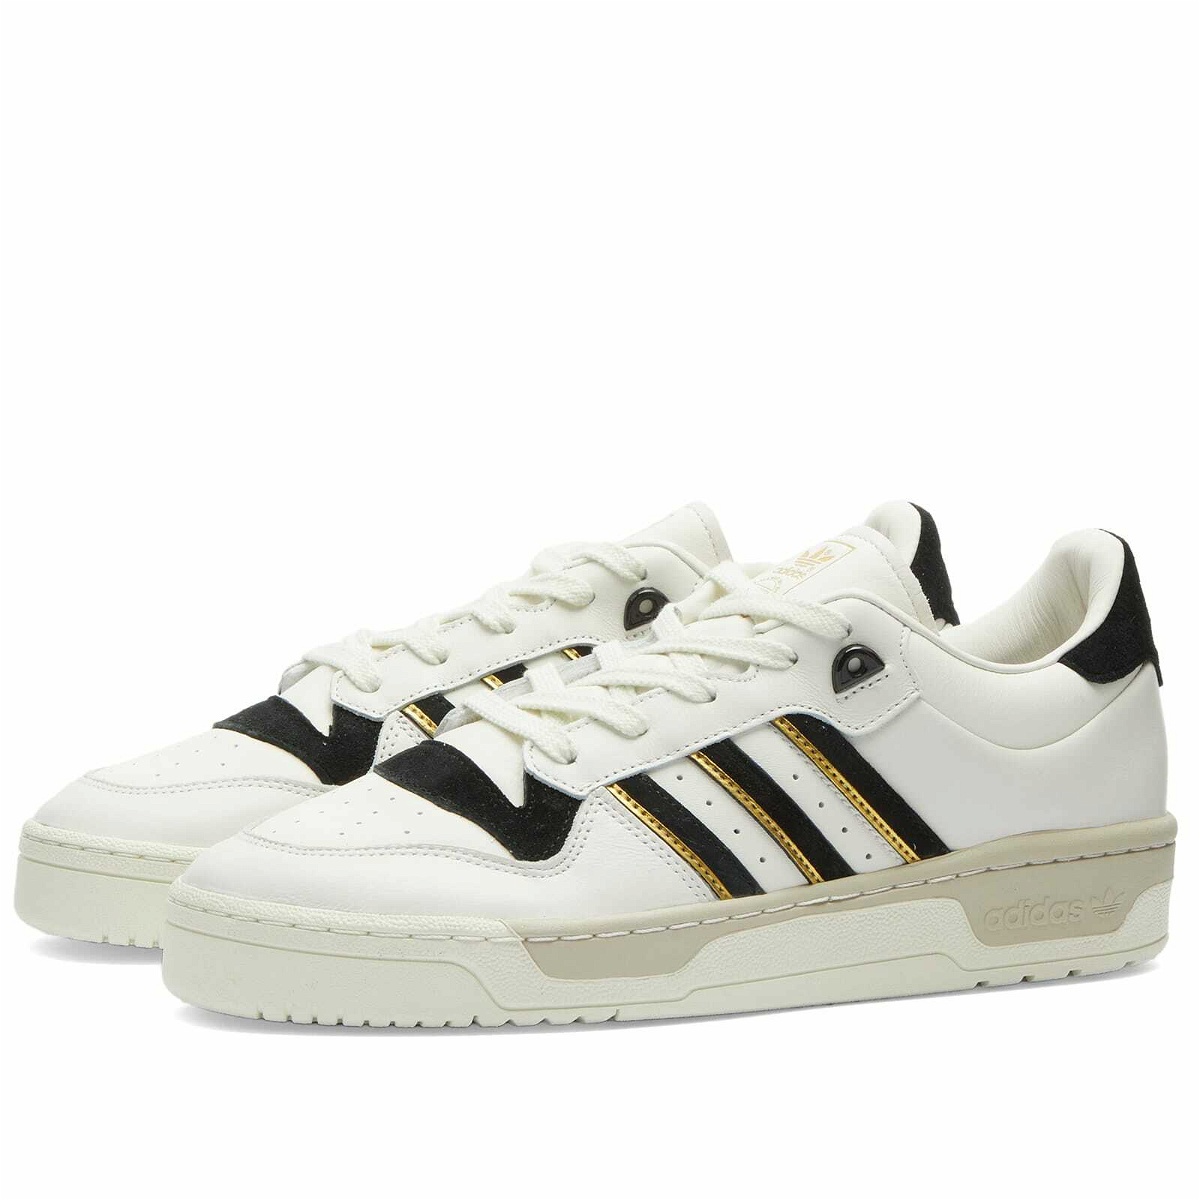 Photo: Adidas Men's RIVALRY 86 LOW Sneakers in Cloud White/Core Black/Ivory